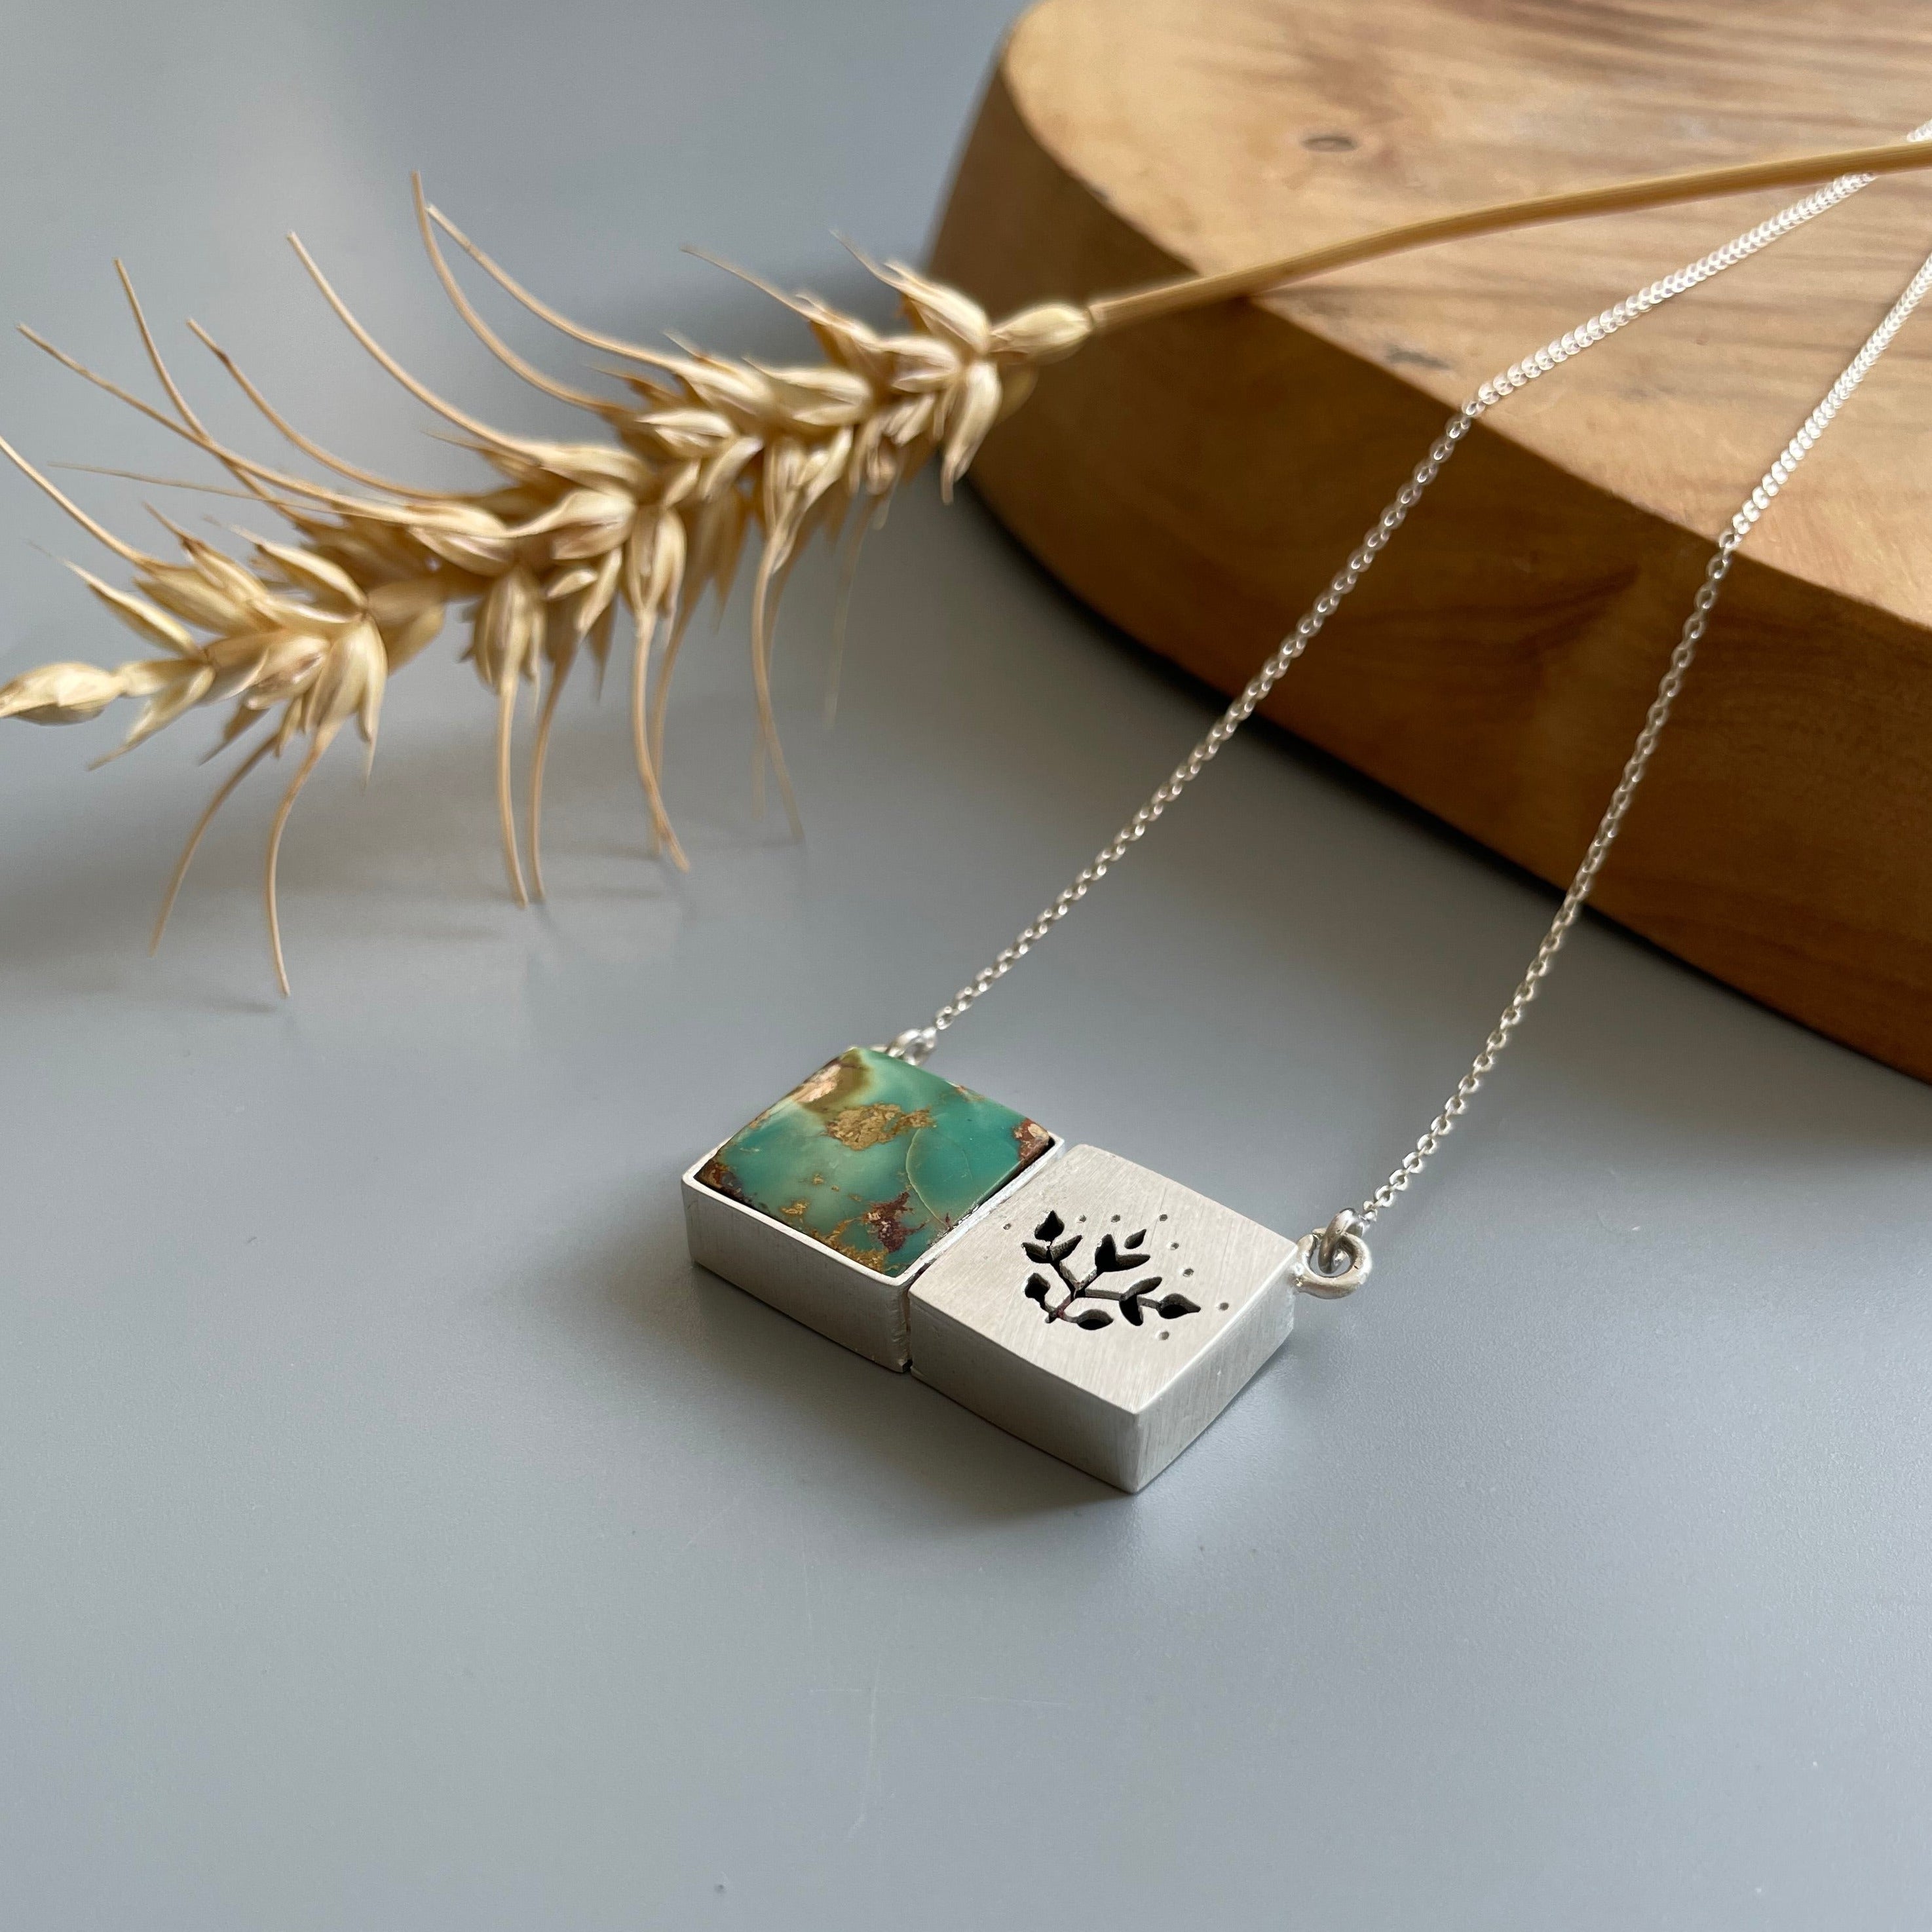 Handmade Square shaped Necklace with Natural Turquoise